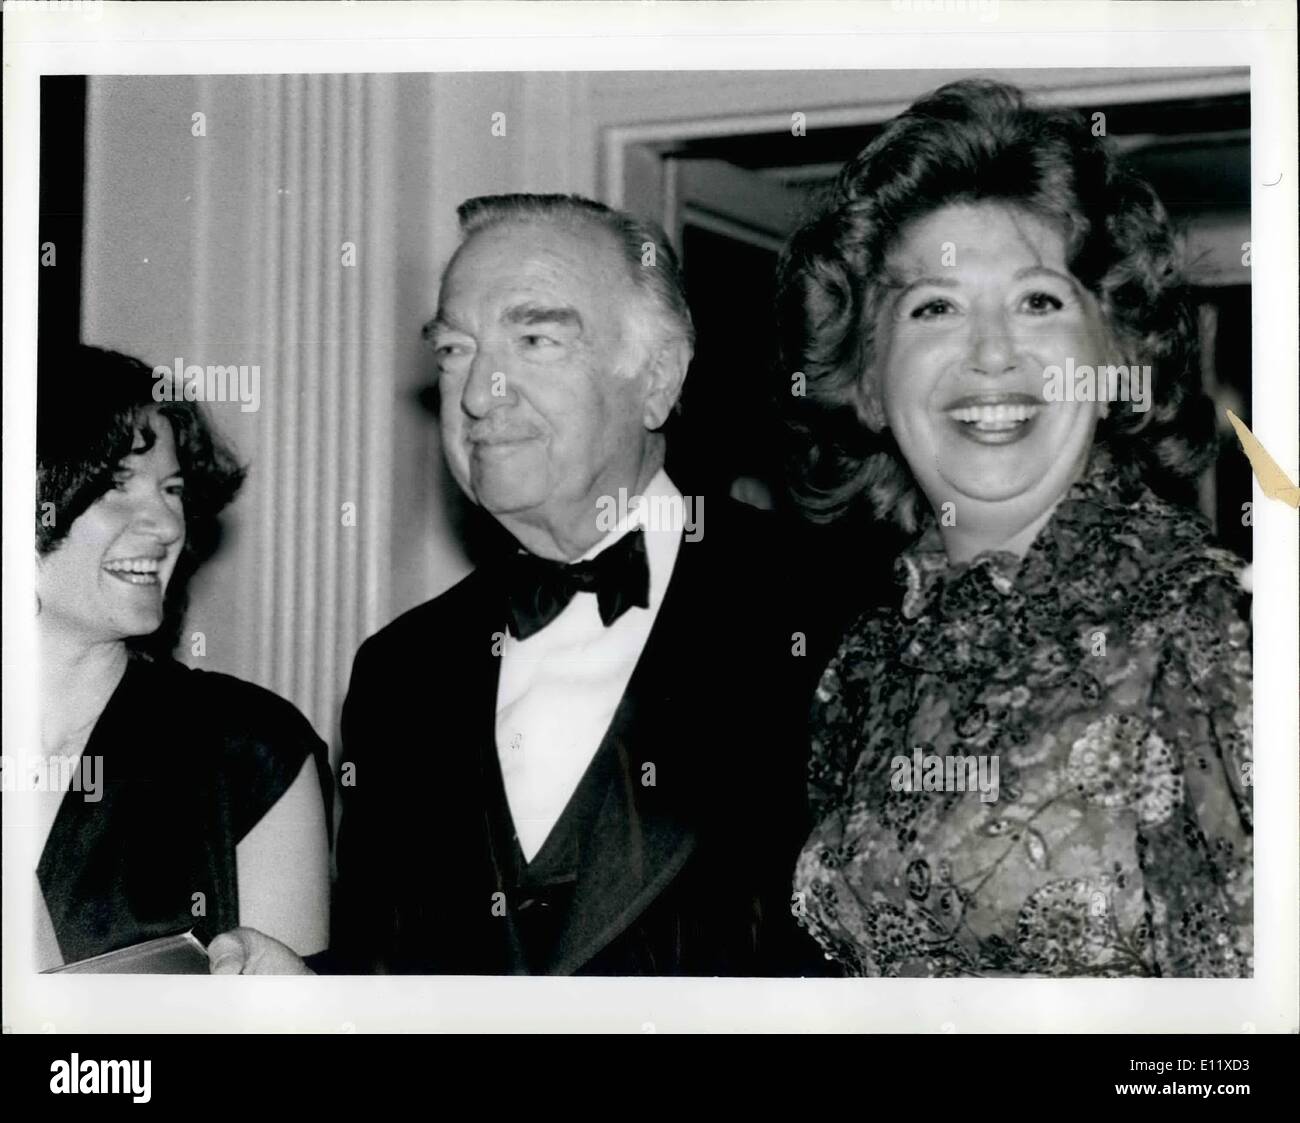 Feb. 02, 1981 - Waldorf-Astoria--The Scientists Institute For Public Information old dinner-dance honoring CBS Newsman Walter Cronkite. Left to right are Dr. Sally Ride, Astronaut (NASA Space Shuttle Program)., Walter Cronkite, CBS Newsman, and Beverly Sills, opera star and Mistress of Ceremonies. Stock Photo